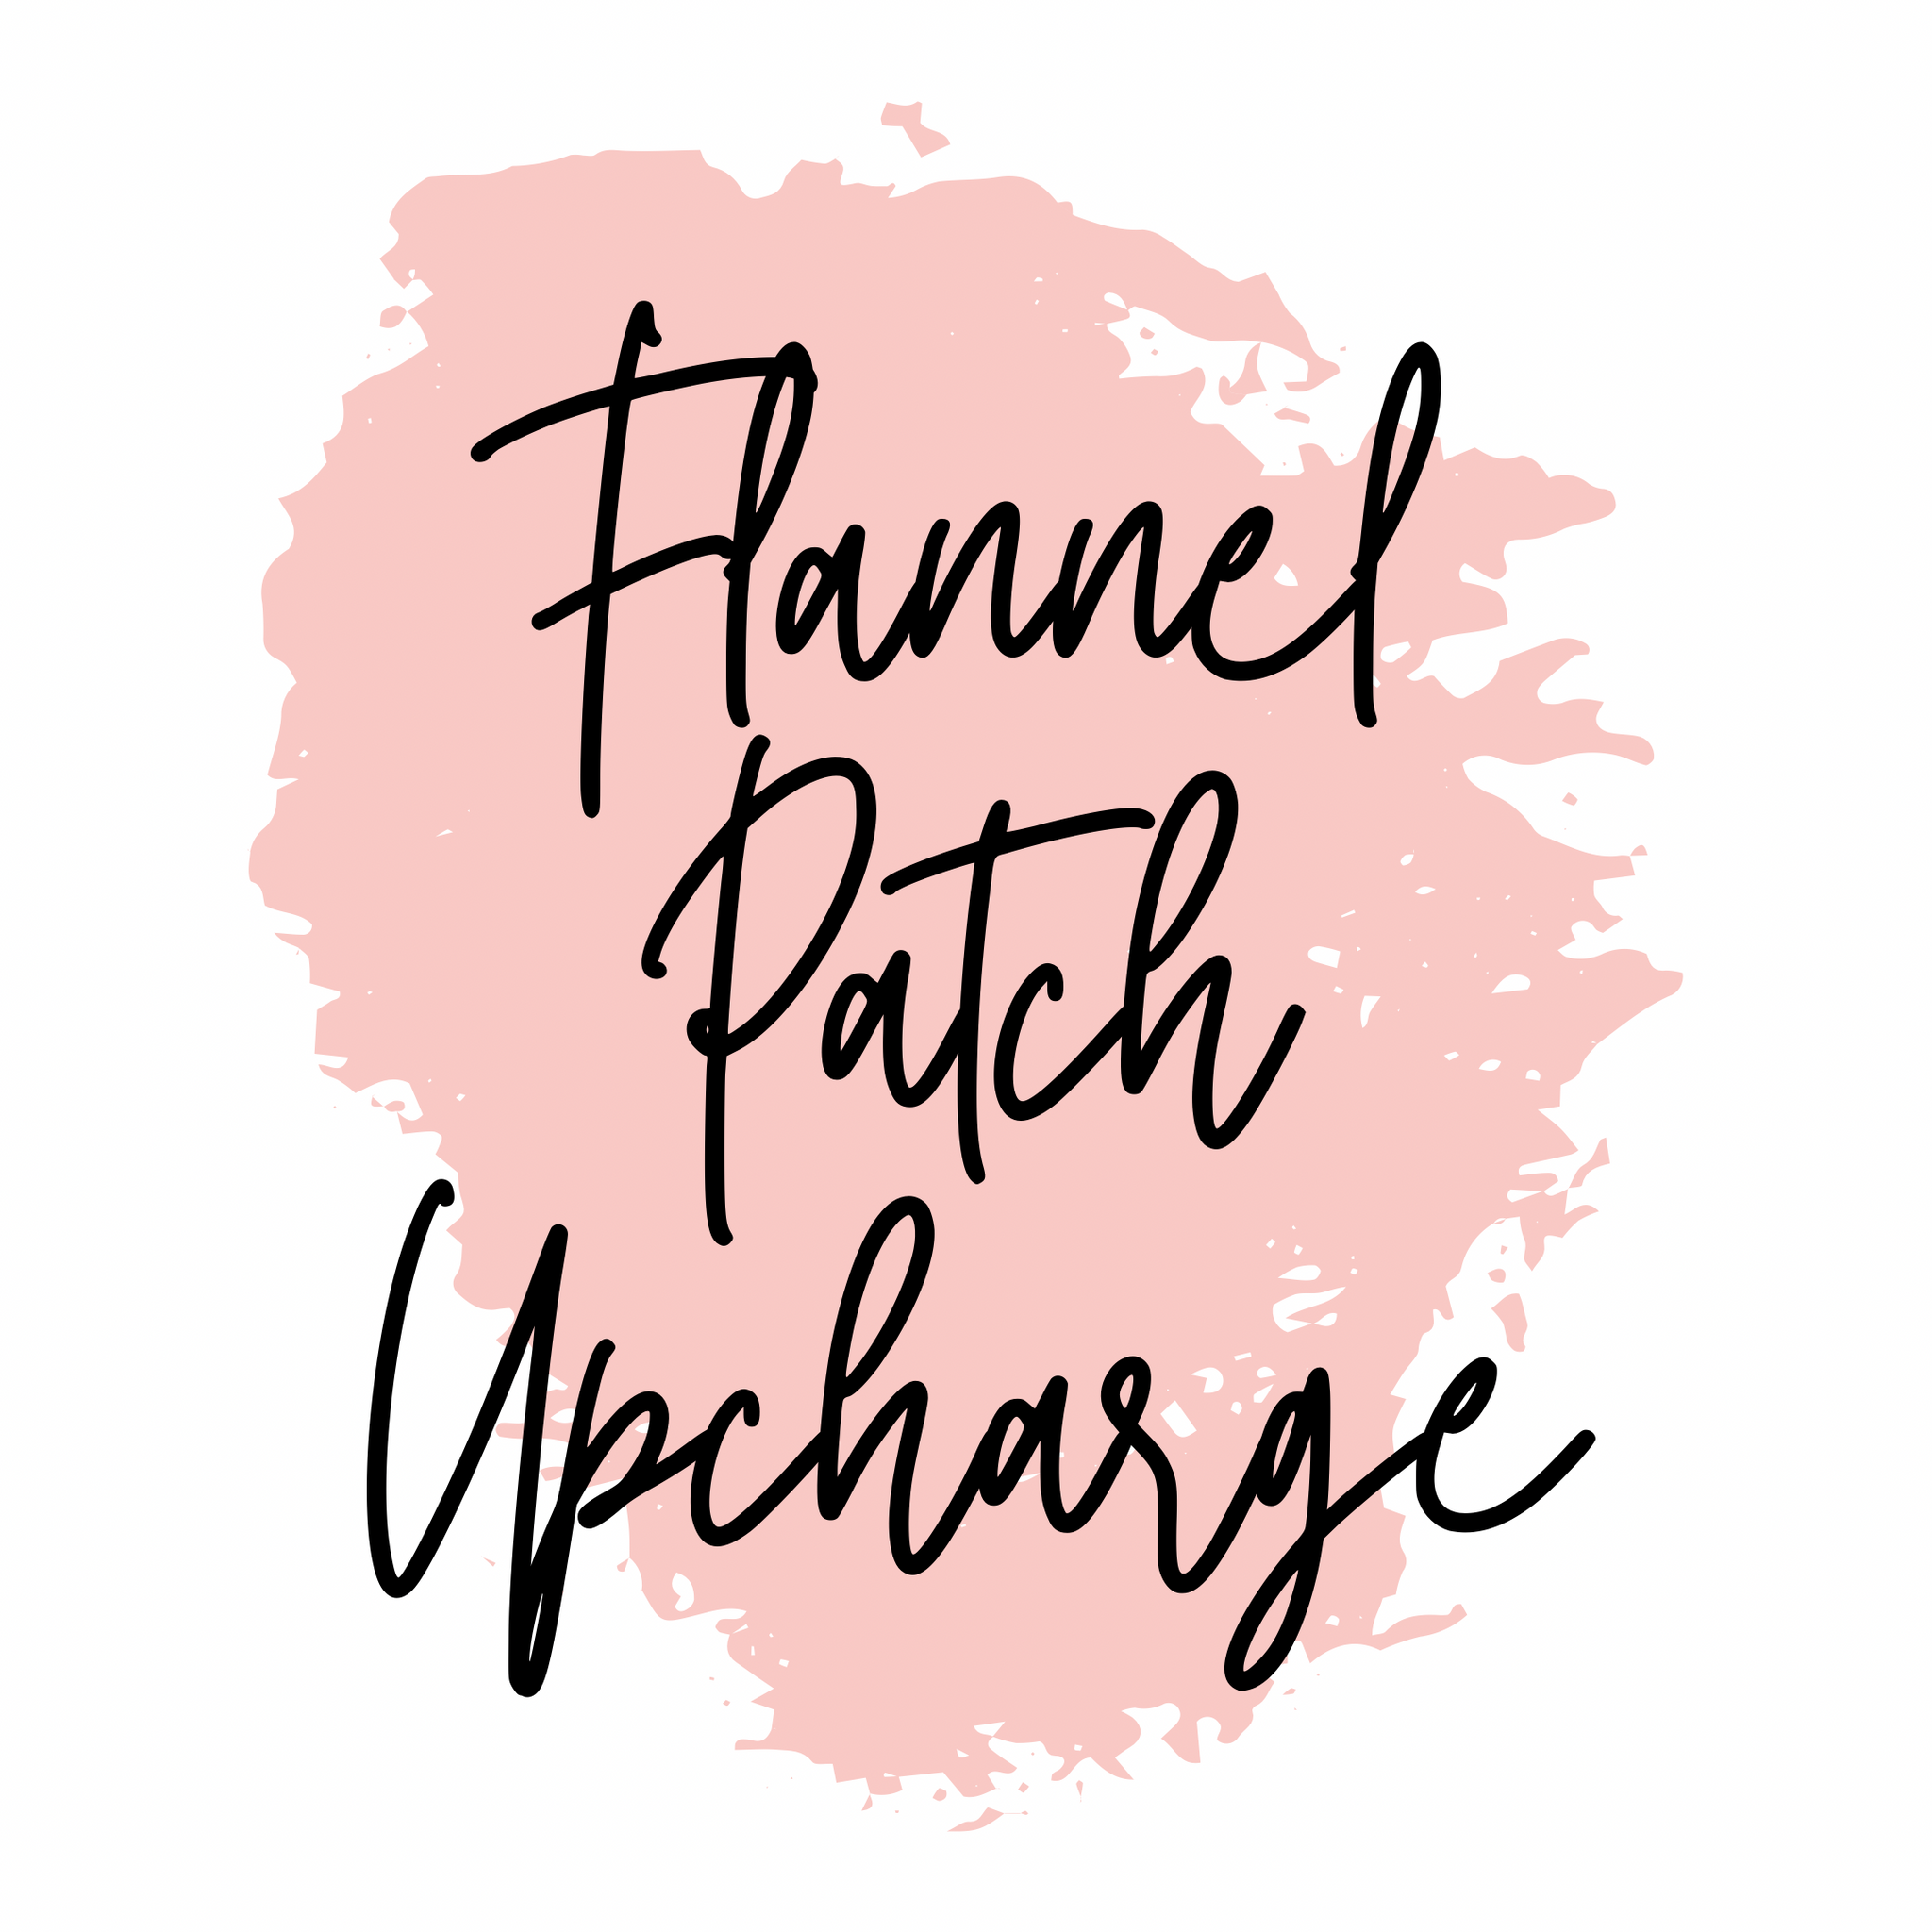 Flannel Patch Size Upcharge